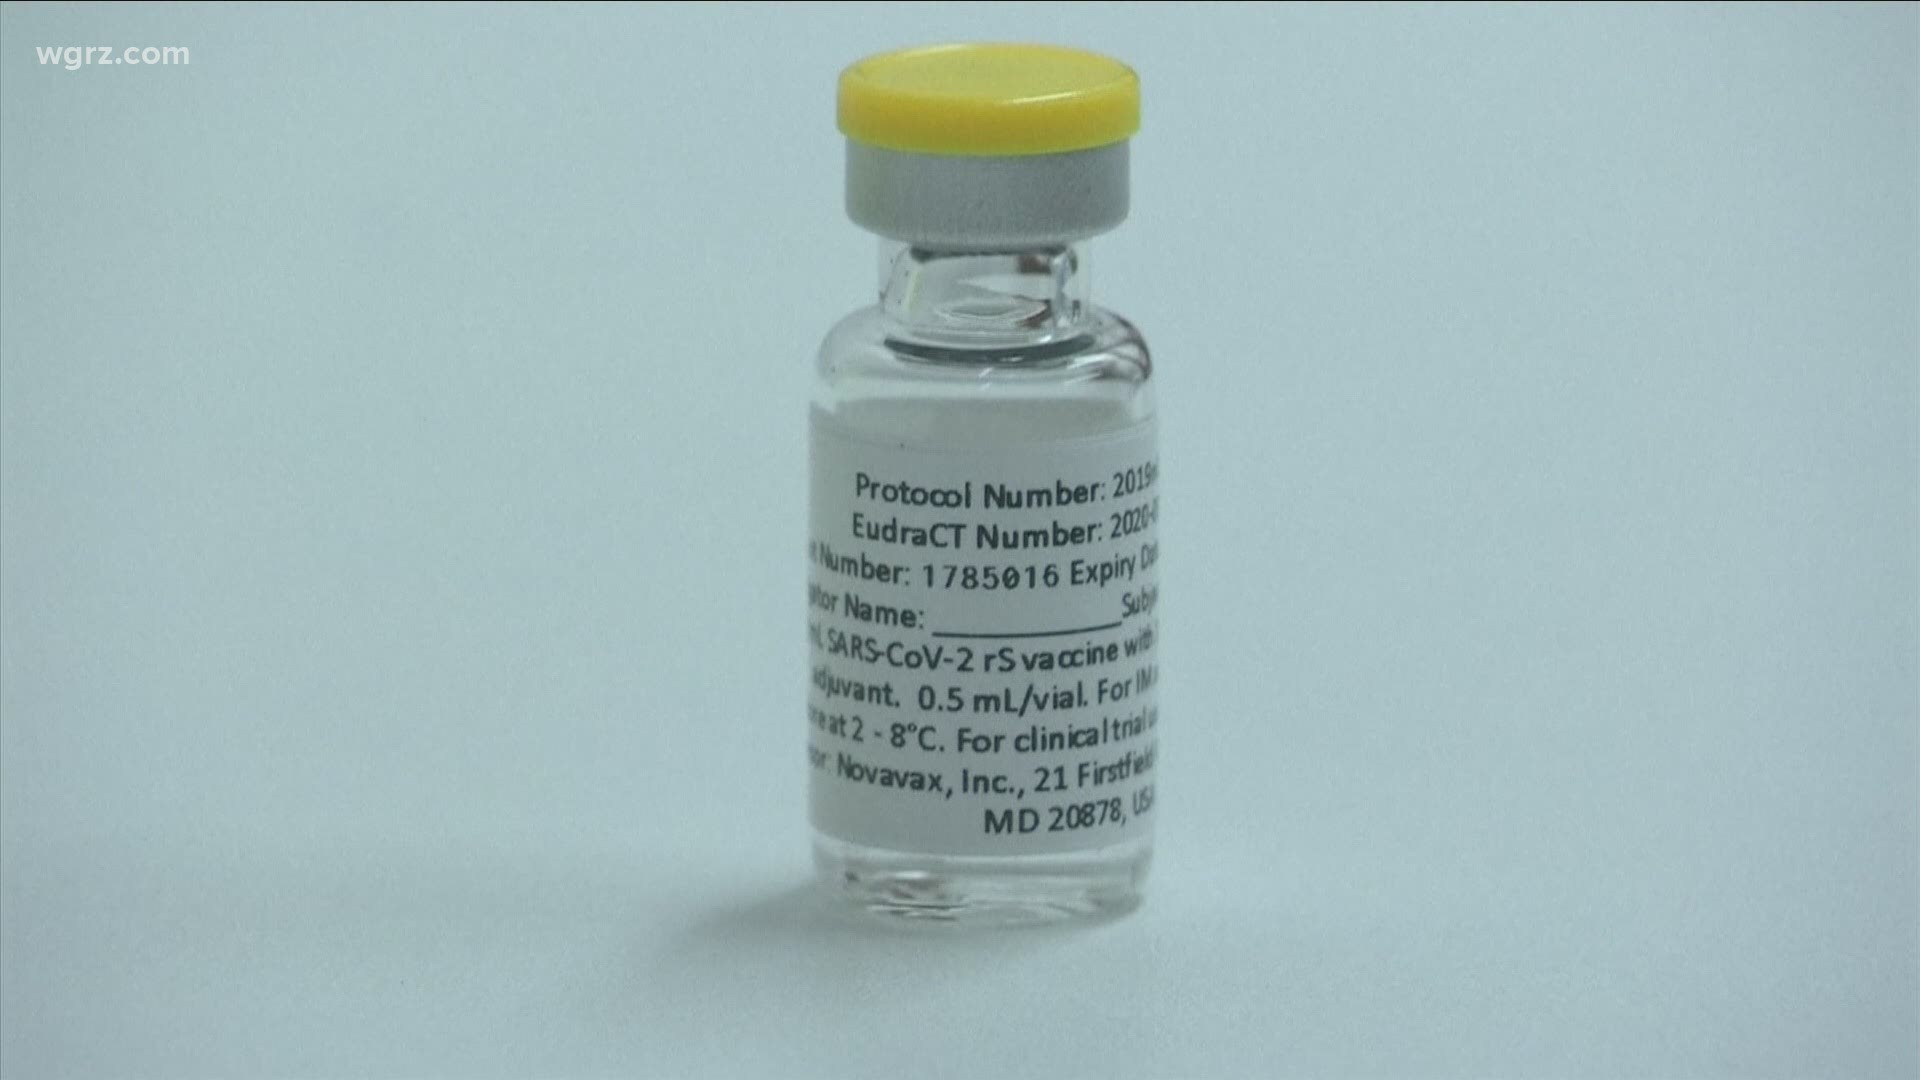 If the vaccine is approved on Thursday, New York State expects to receive an initial allocation of 170,000 doses as soon as this weekend.